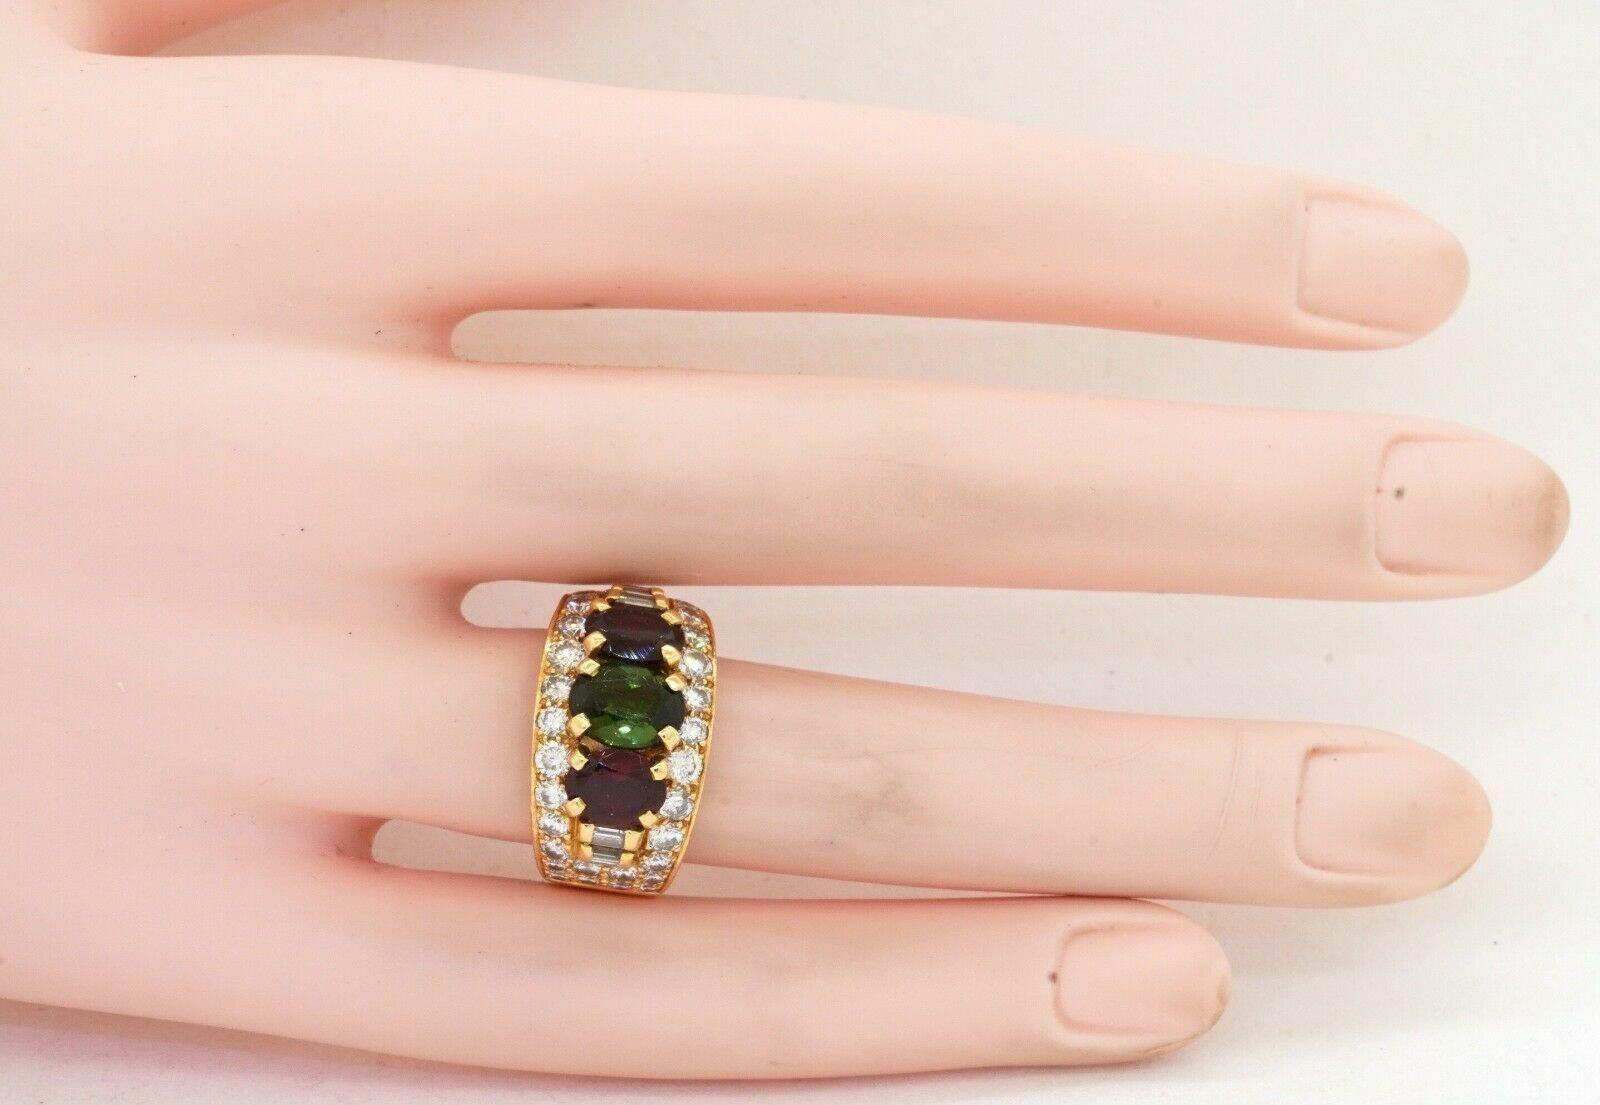 Vintage Bvlgari Heavy 18k Yg 5.50ct VS1/F Diamond & Tourmaline Ring In Good Condition For Sale In Fort Lauderdale, FL